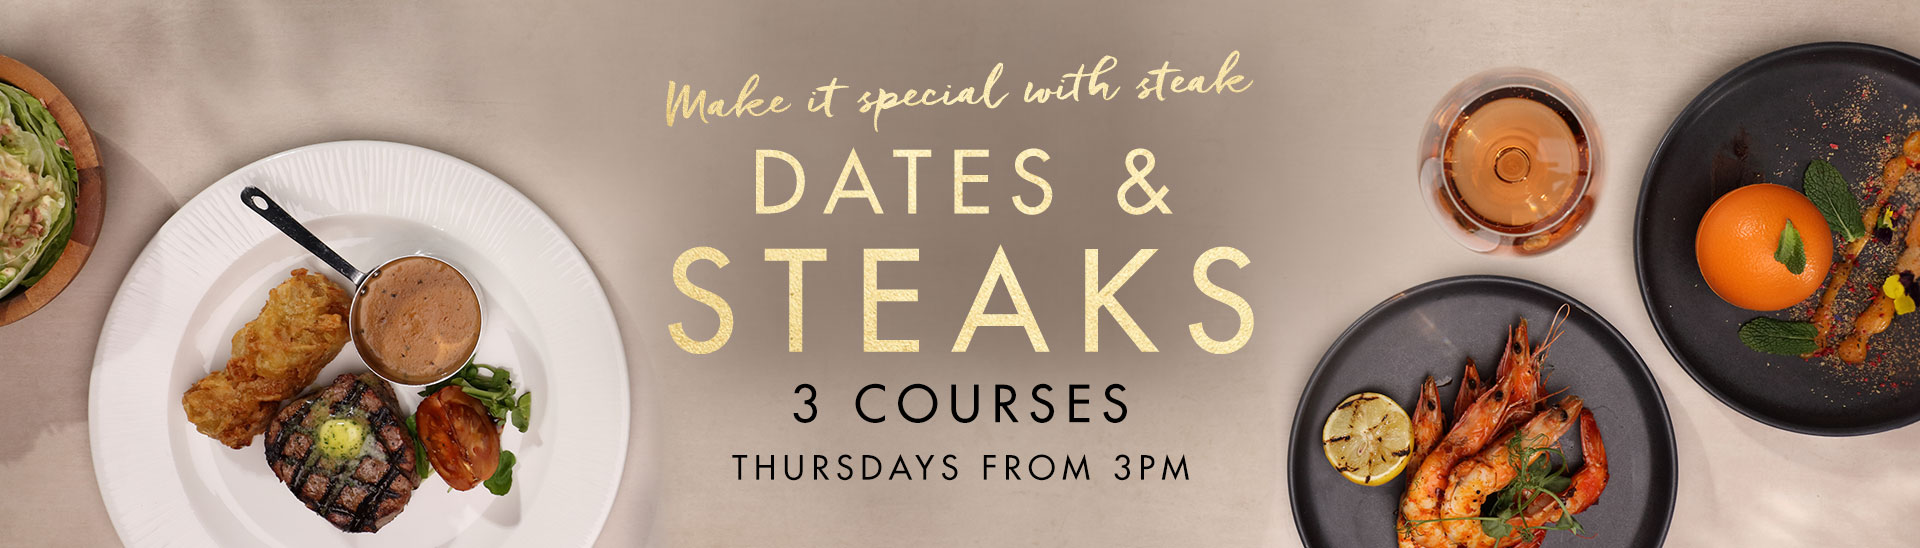 Dates & Steaks at Miller & Carter Bournemouth